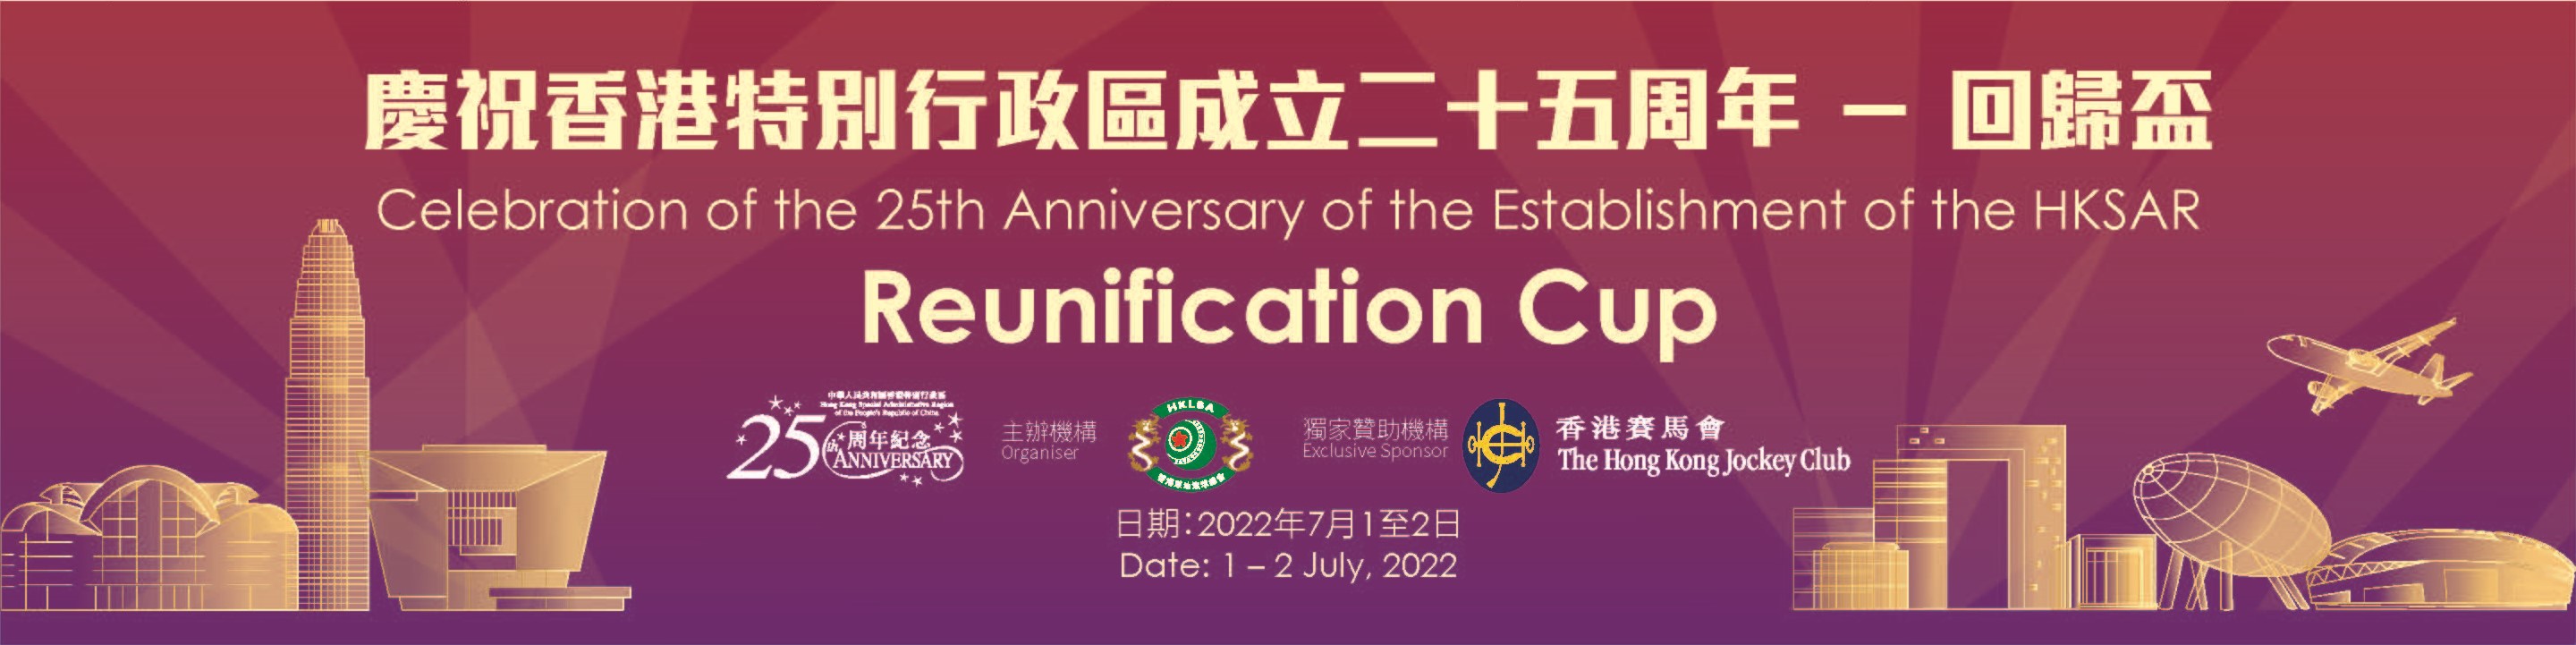 Celebration of the 25th Anniversary of the Establishment of the HKSAR – Reunification Cup (Updated on 27/7/22)